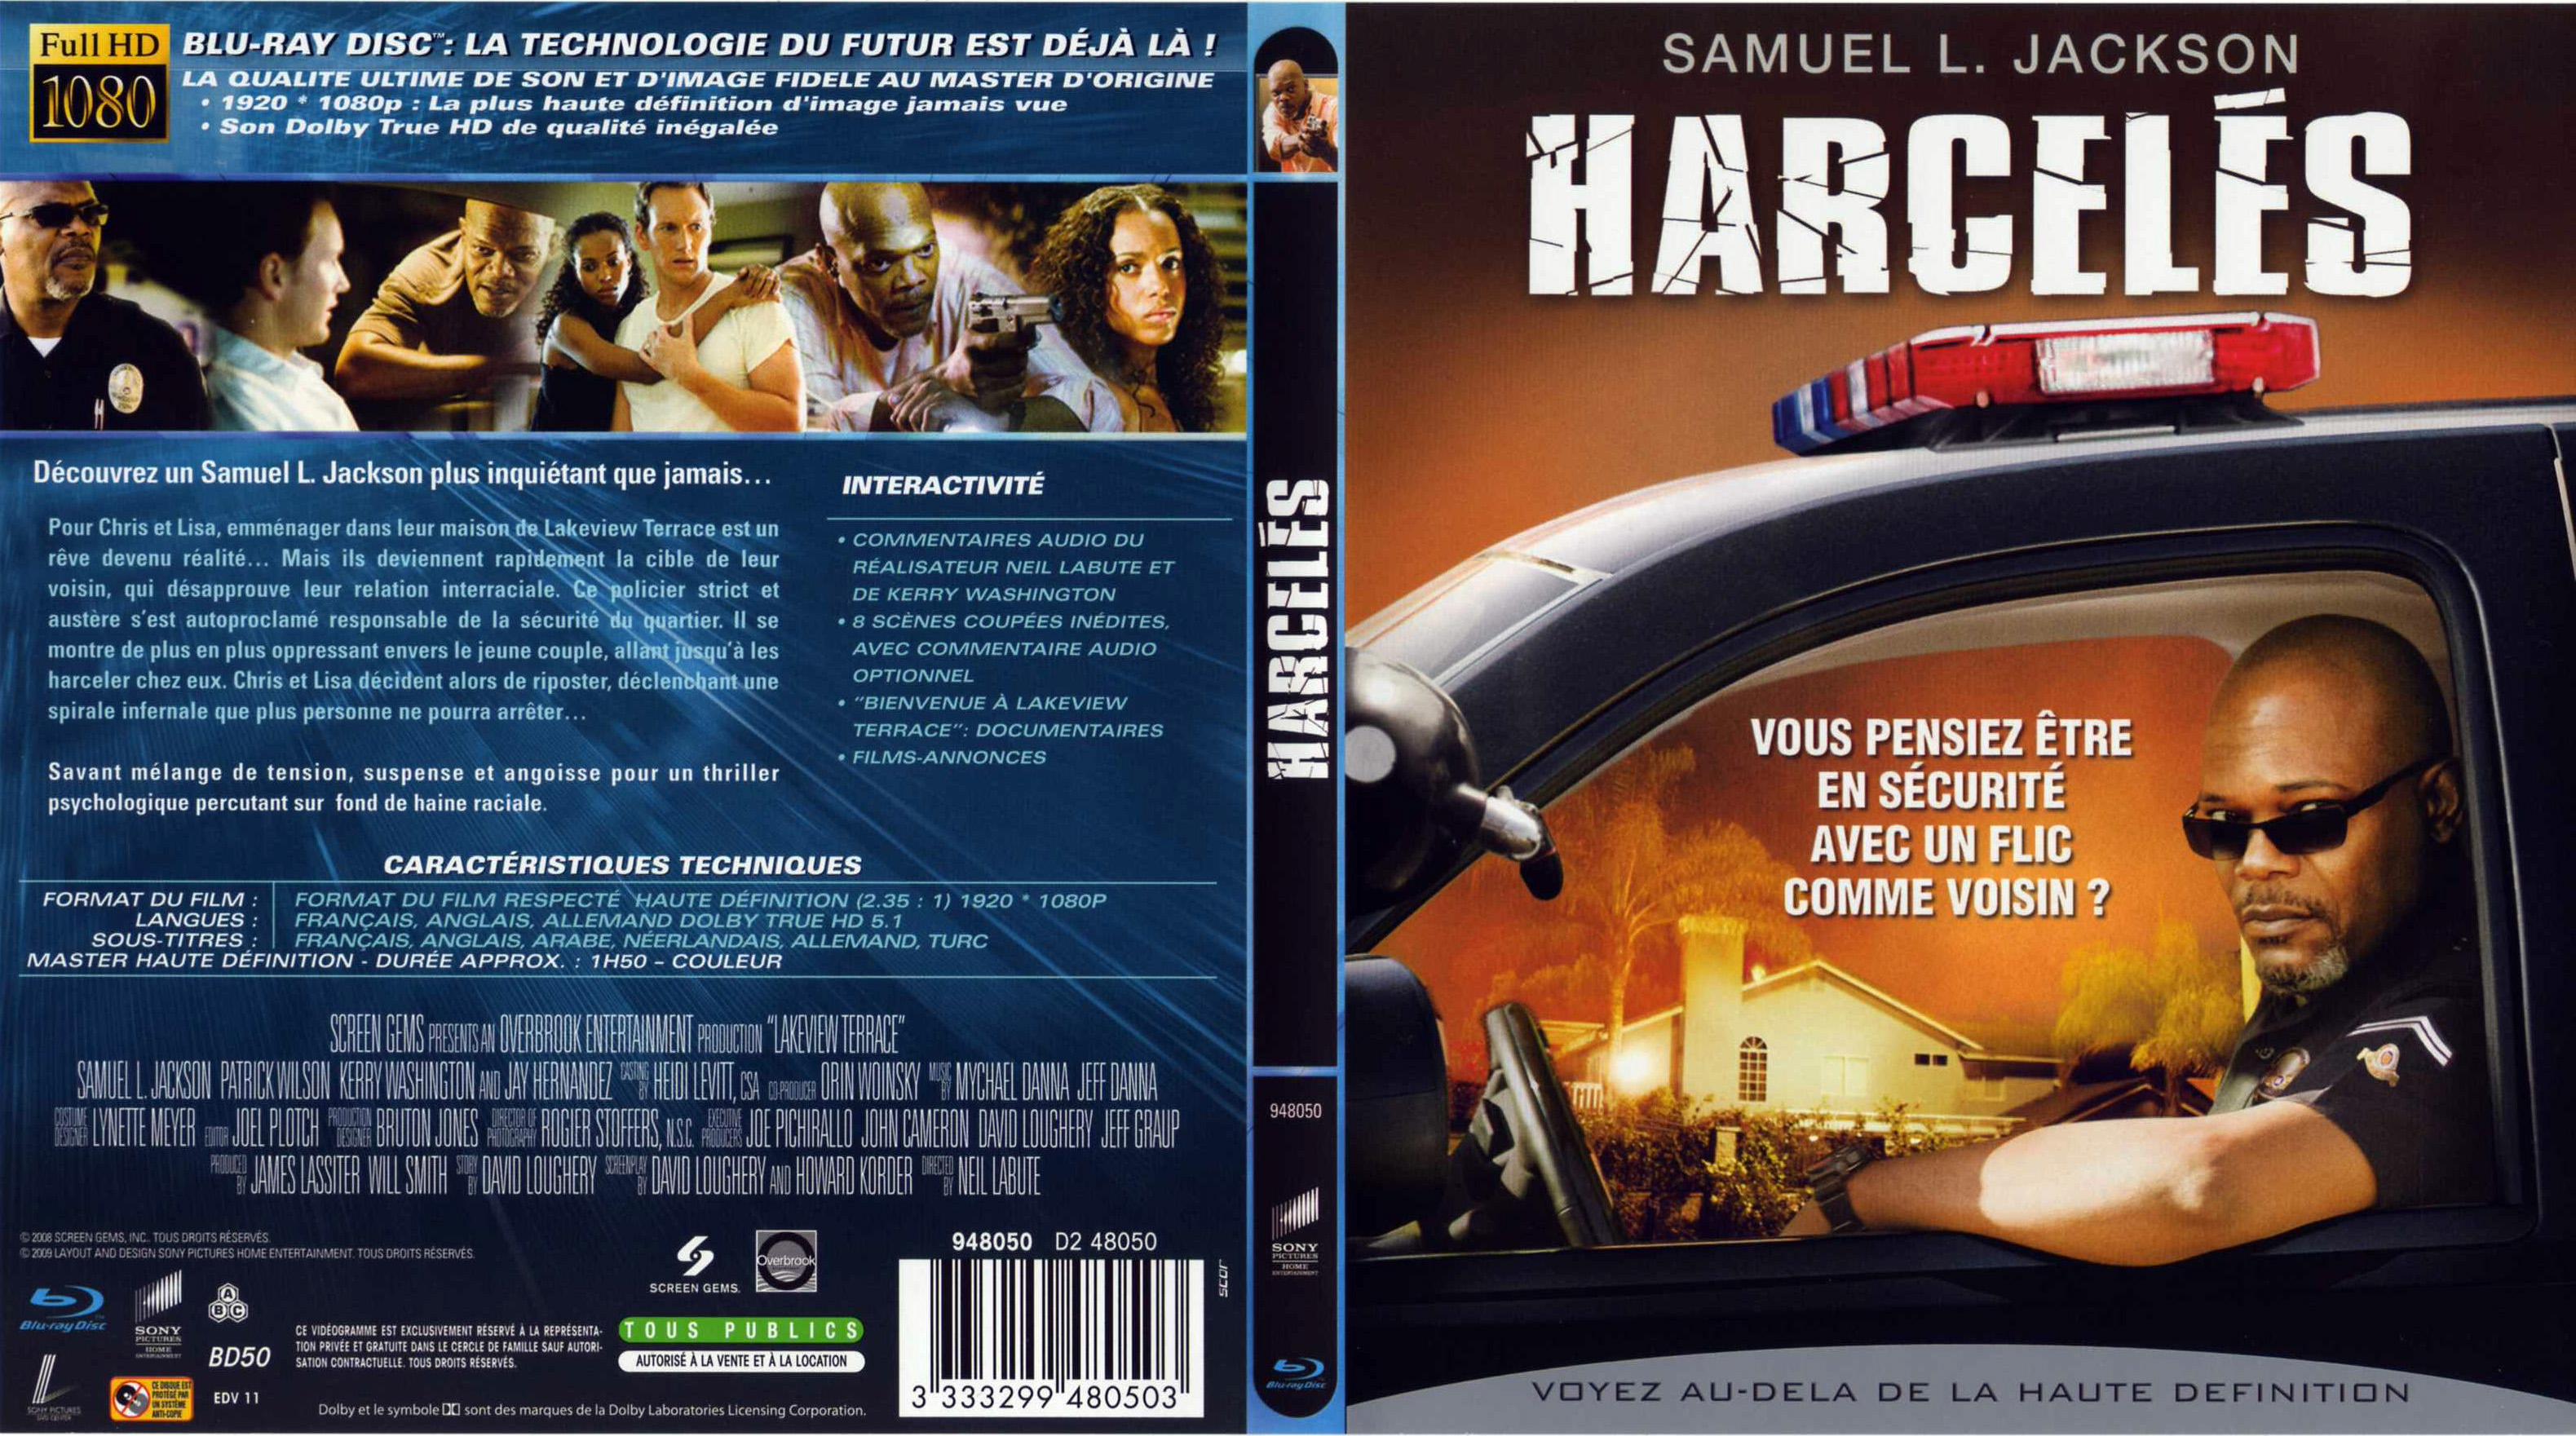 Jaquette DVD Harcels (BLU-RAY)